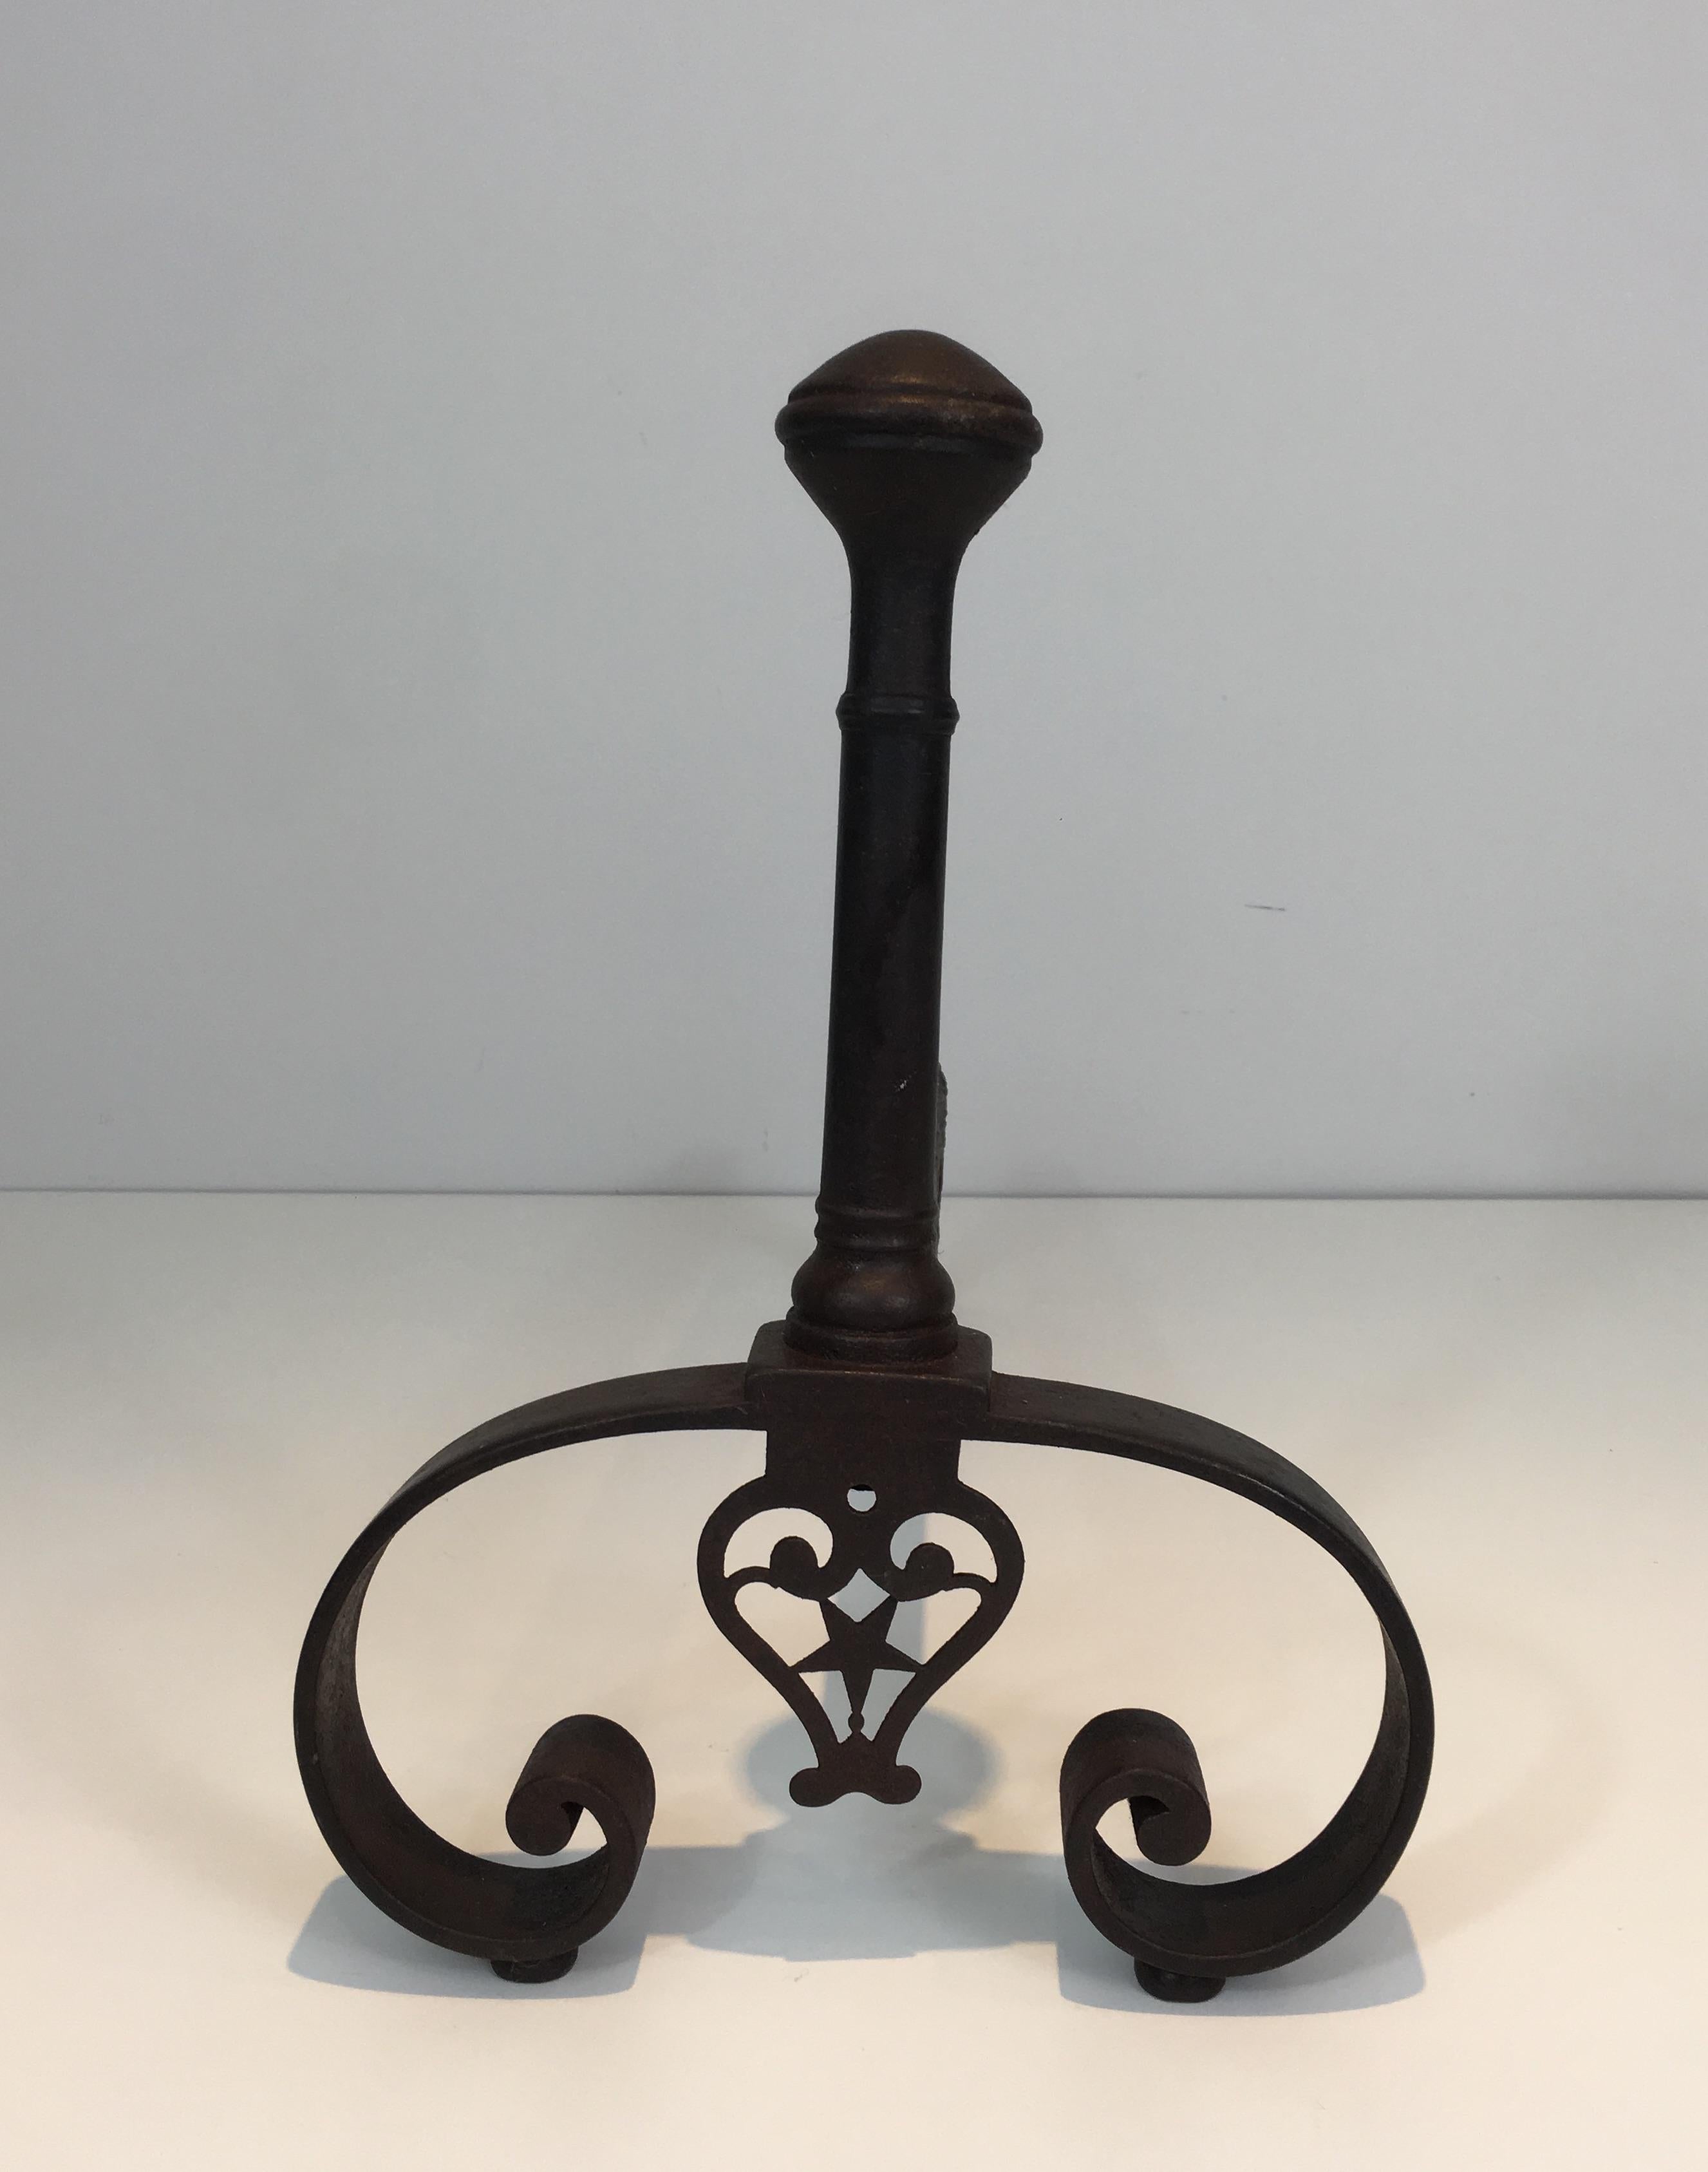 Pair of Forged Wrought Iron Andirons, Gothic Style, French, 18th Century  For Sale 3